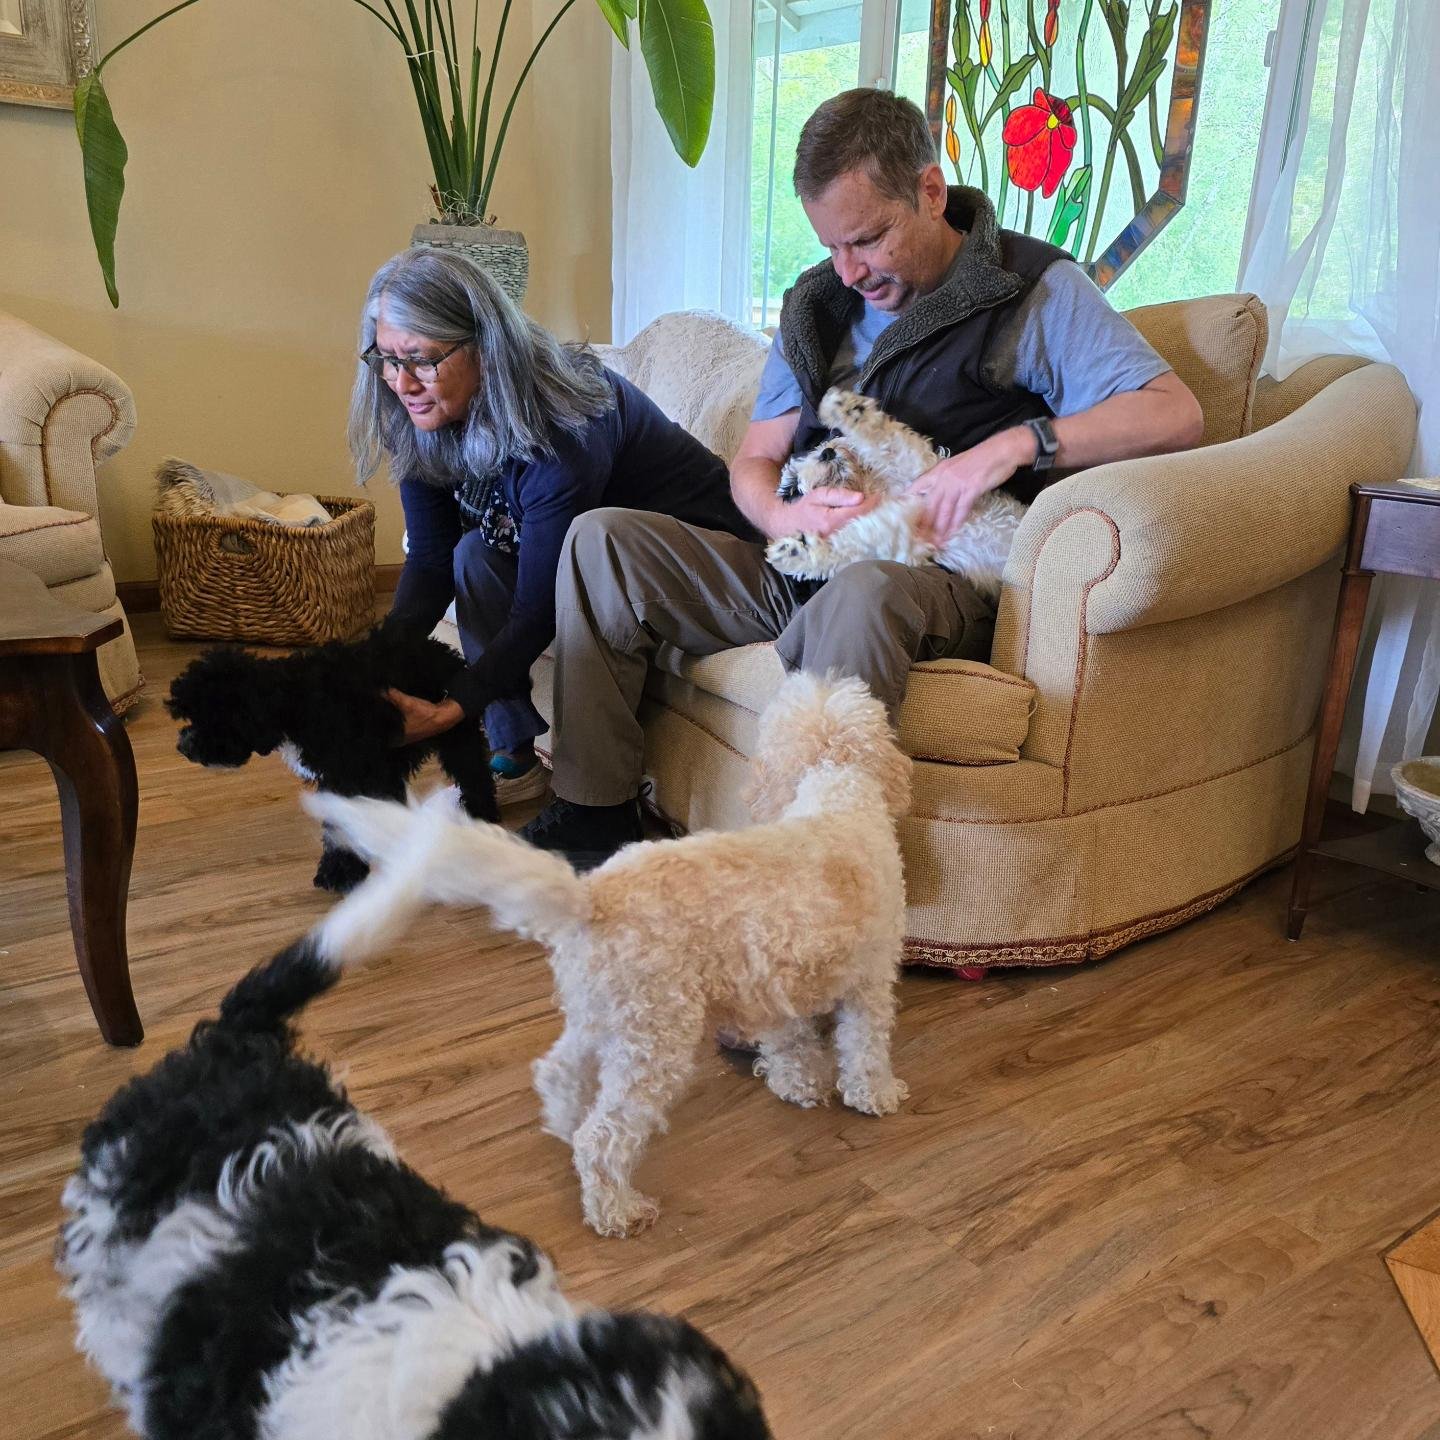 My favorite part of the job.  Puppy selections and getting to know our families. 

#perfect #pickme #simon #australianlabradoodle #australianlabradoodlesofinstagram #instapuppy #instadog #doodledays #doodlelove #doodlesofinstagram #poulsbo #miniaustr